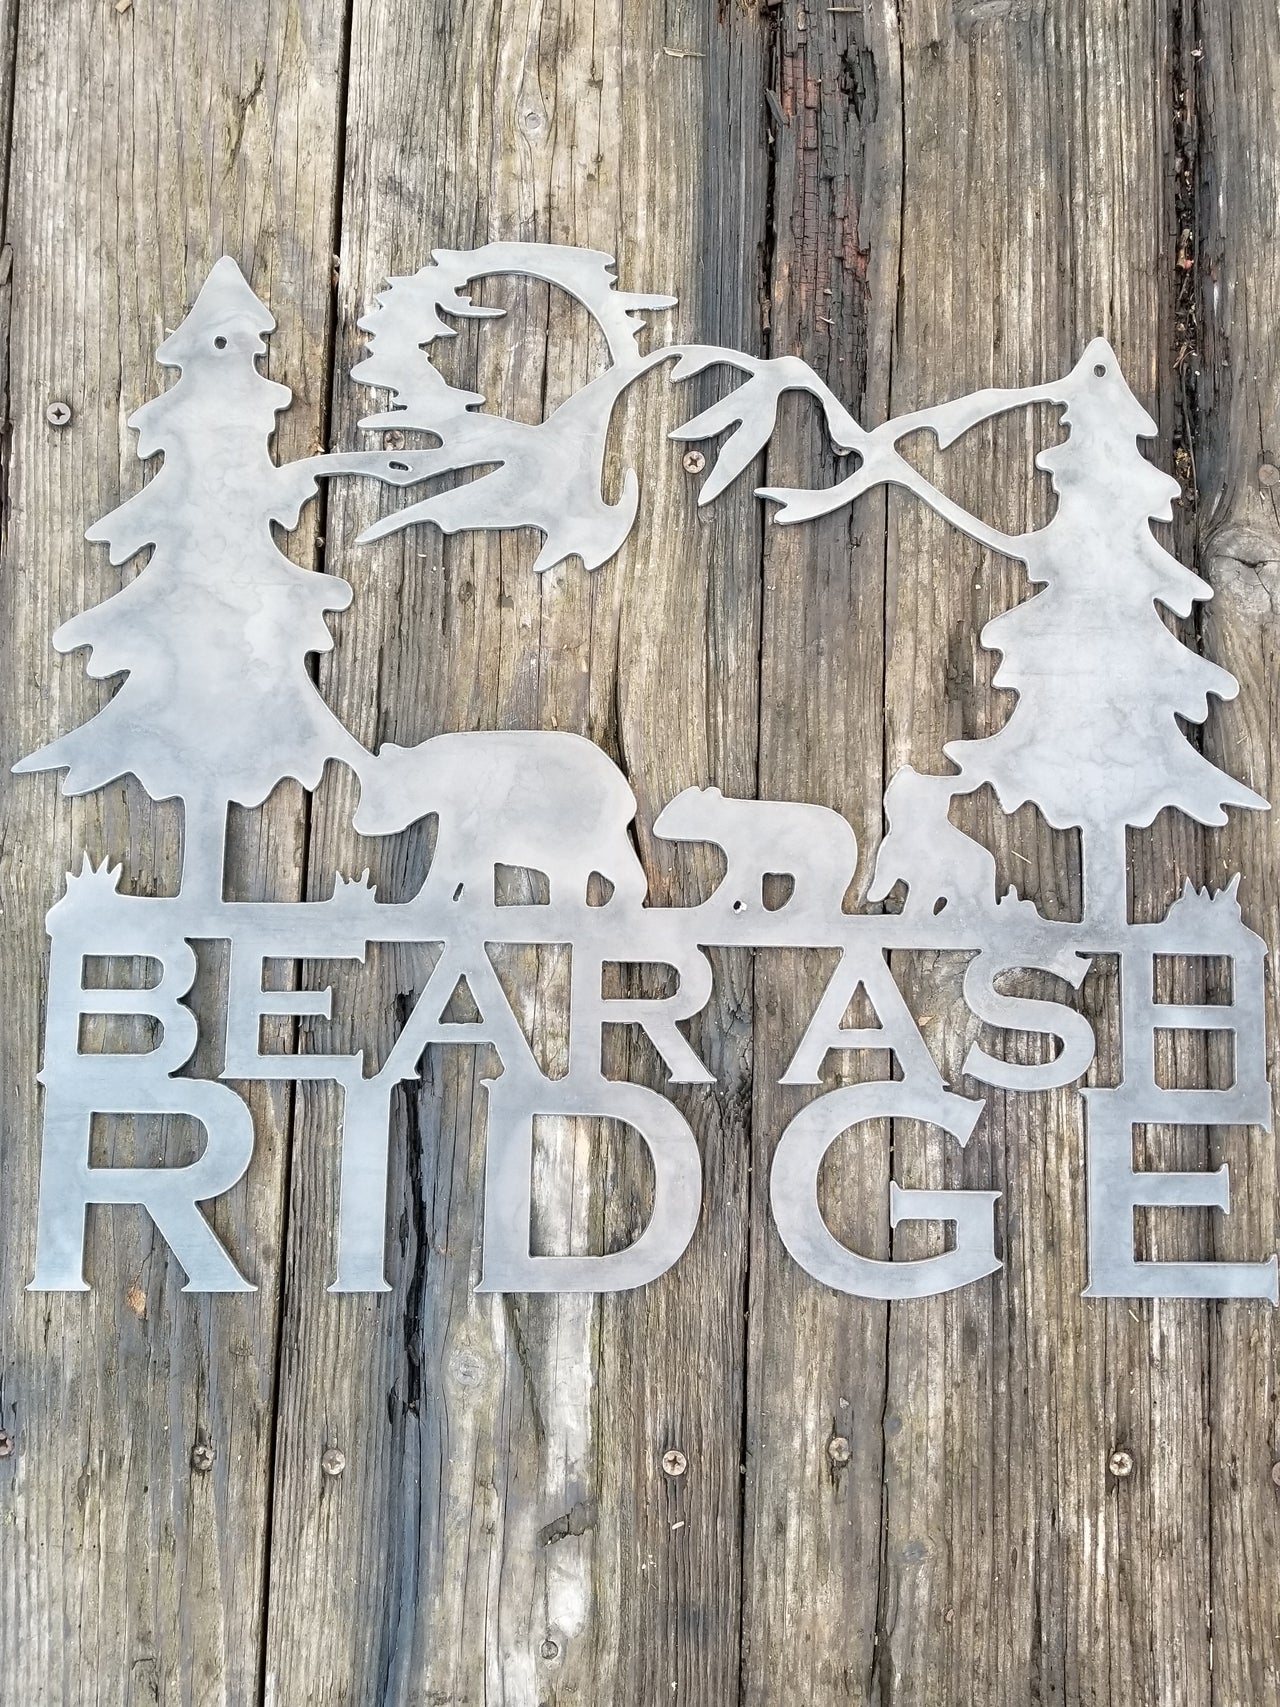 A tree scene with a family of bears and the sun in the background. Underneath the scene the metal sign reads, "Bear Ash Ridge"